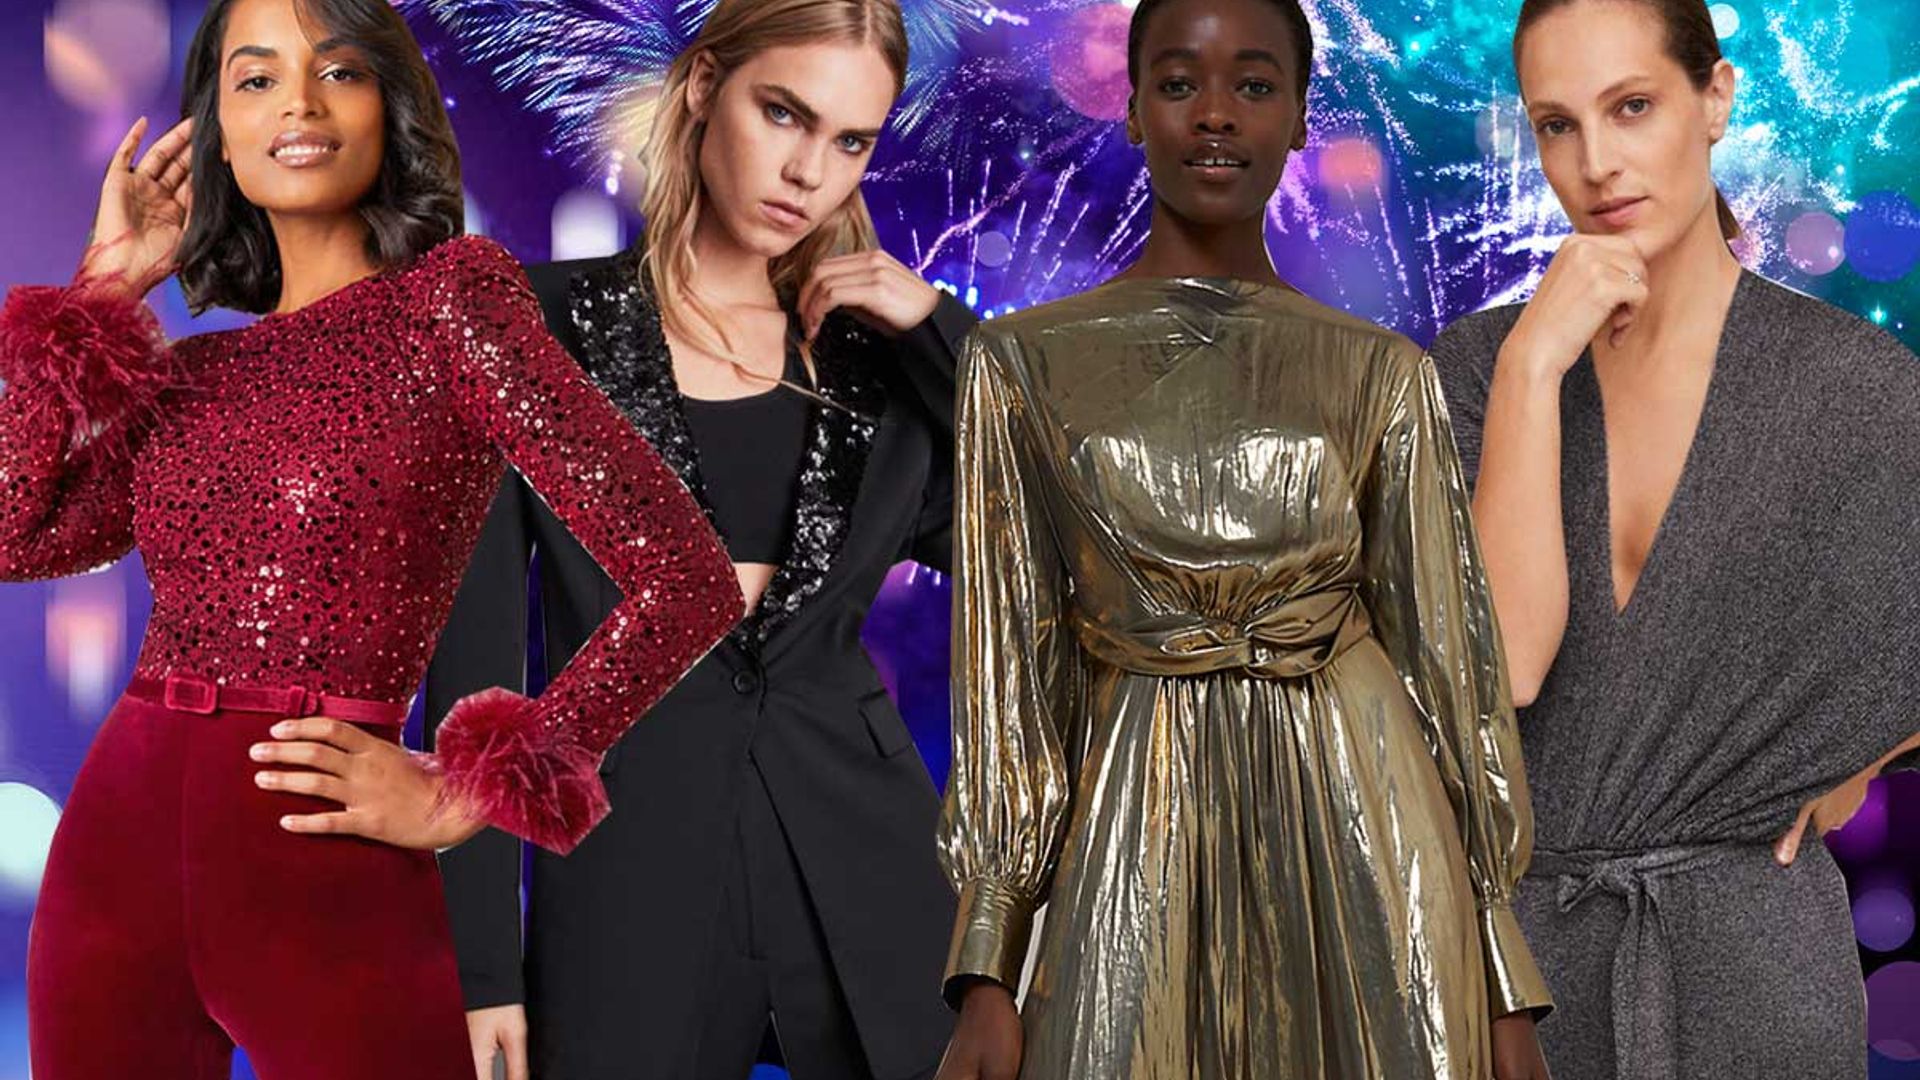 12 best New Year's Eve outfit ideas to ring 2022 in style: From Marks ...